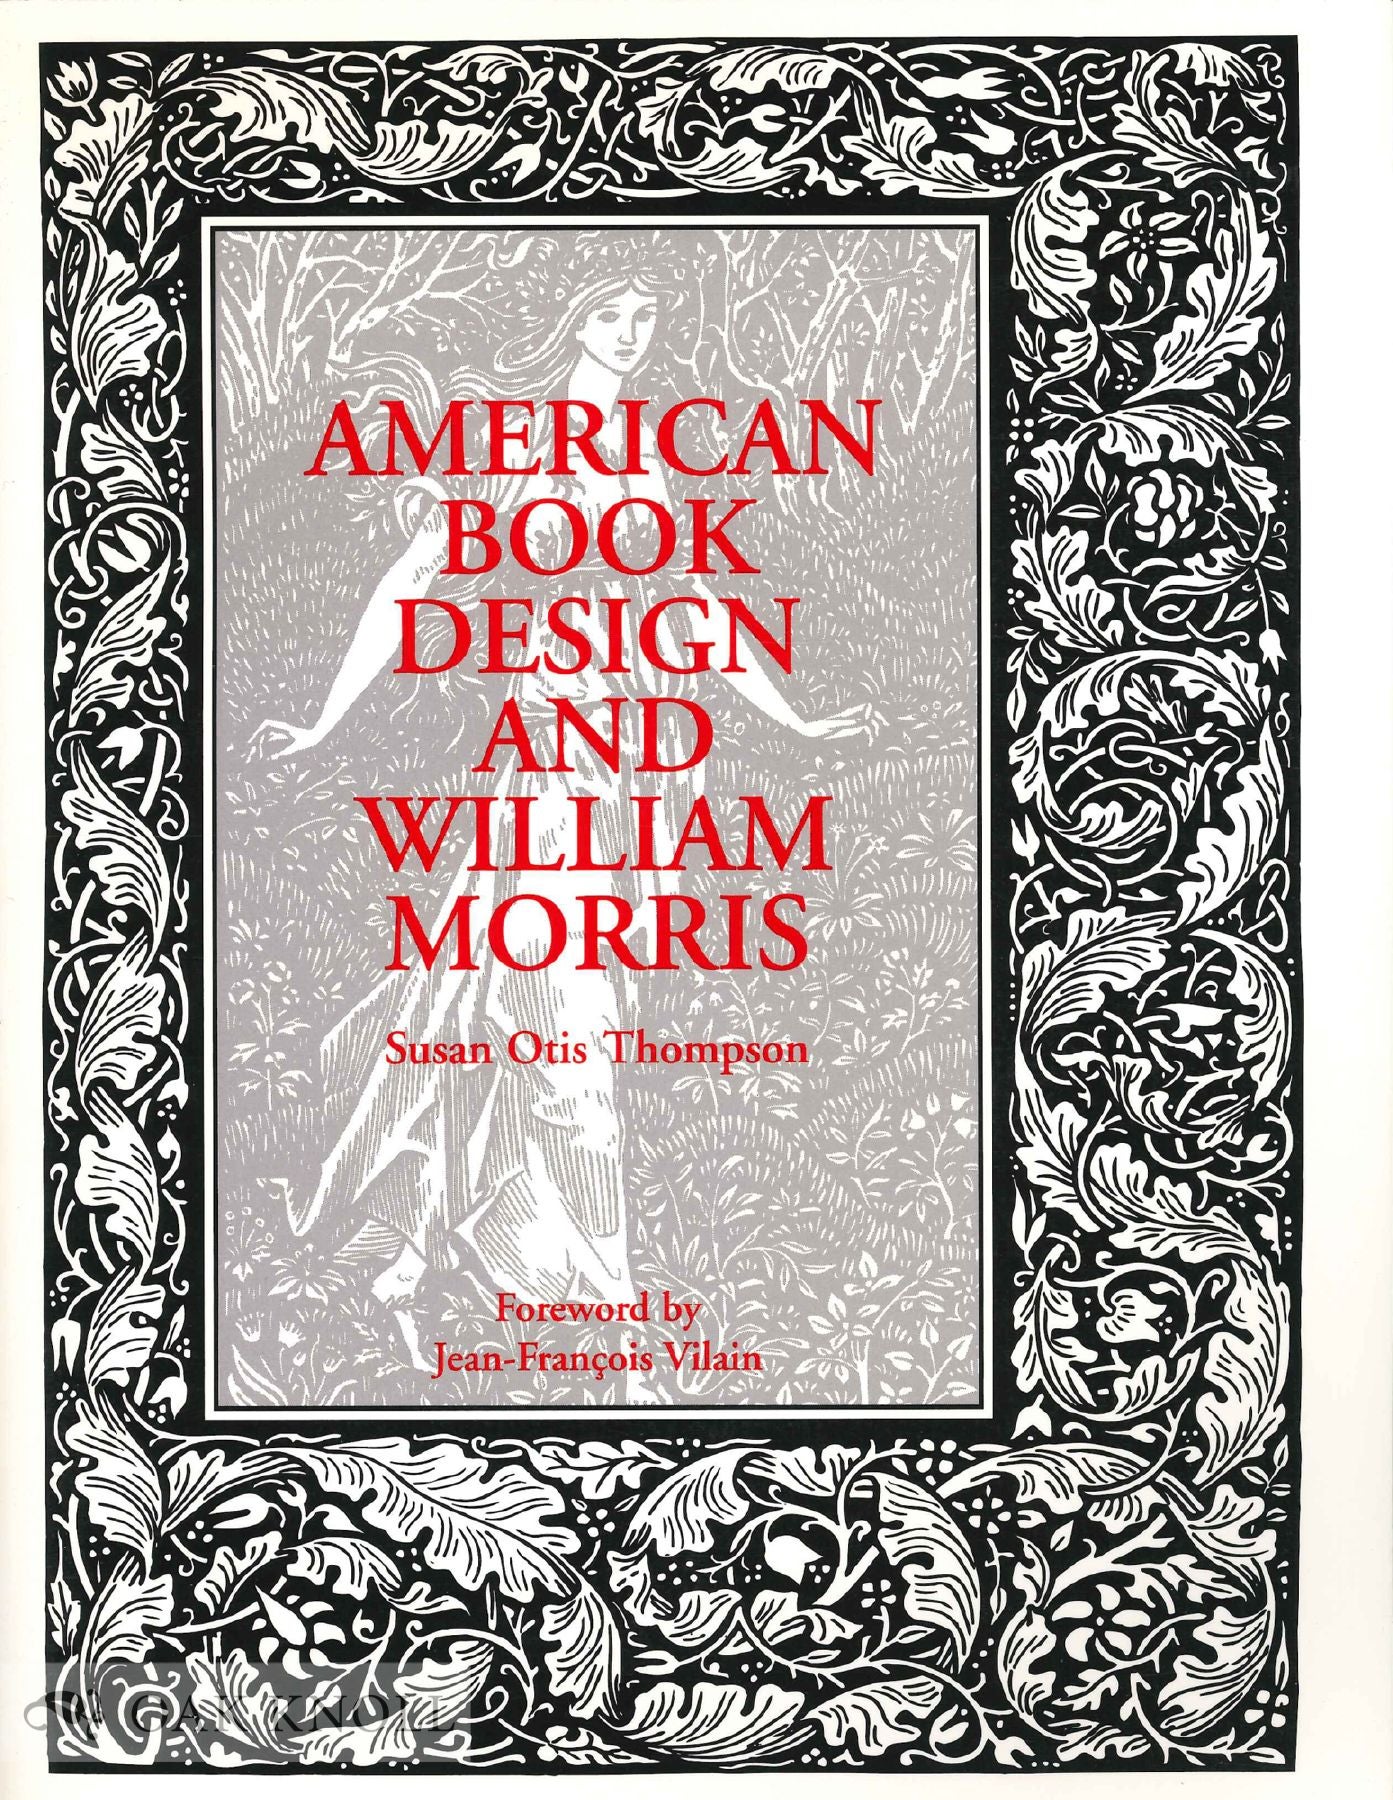 AMERICAN BOOK DESIGN AND WILLIAM MORRIS With a new Foreword by  Jean-Francois Vilain by Susan Otis Thompson on Oak Knoll